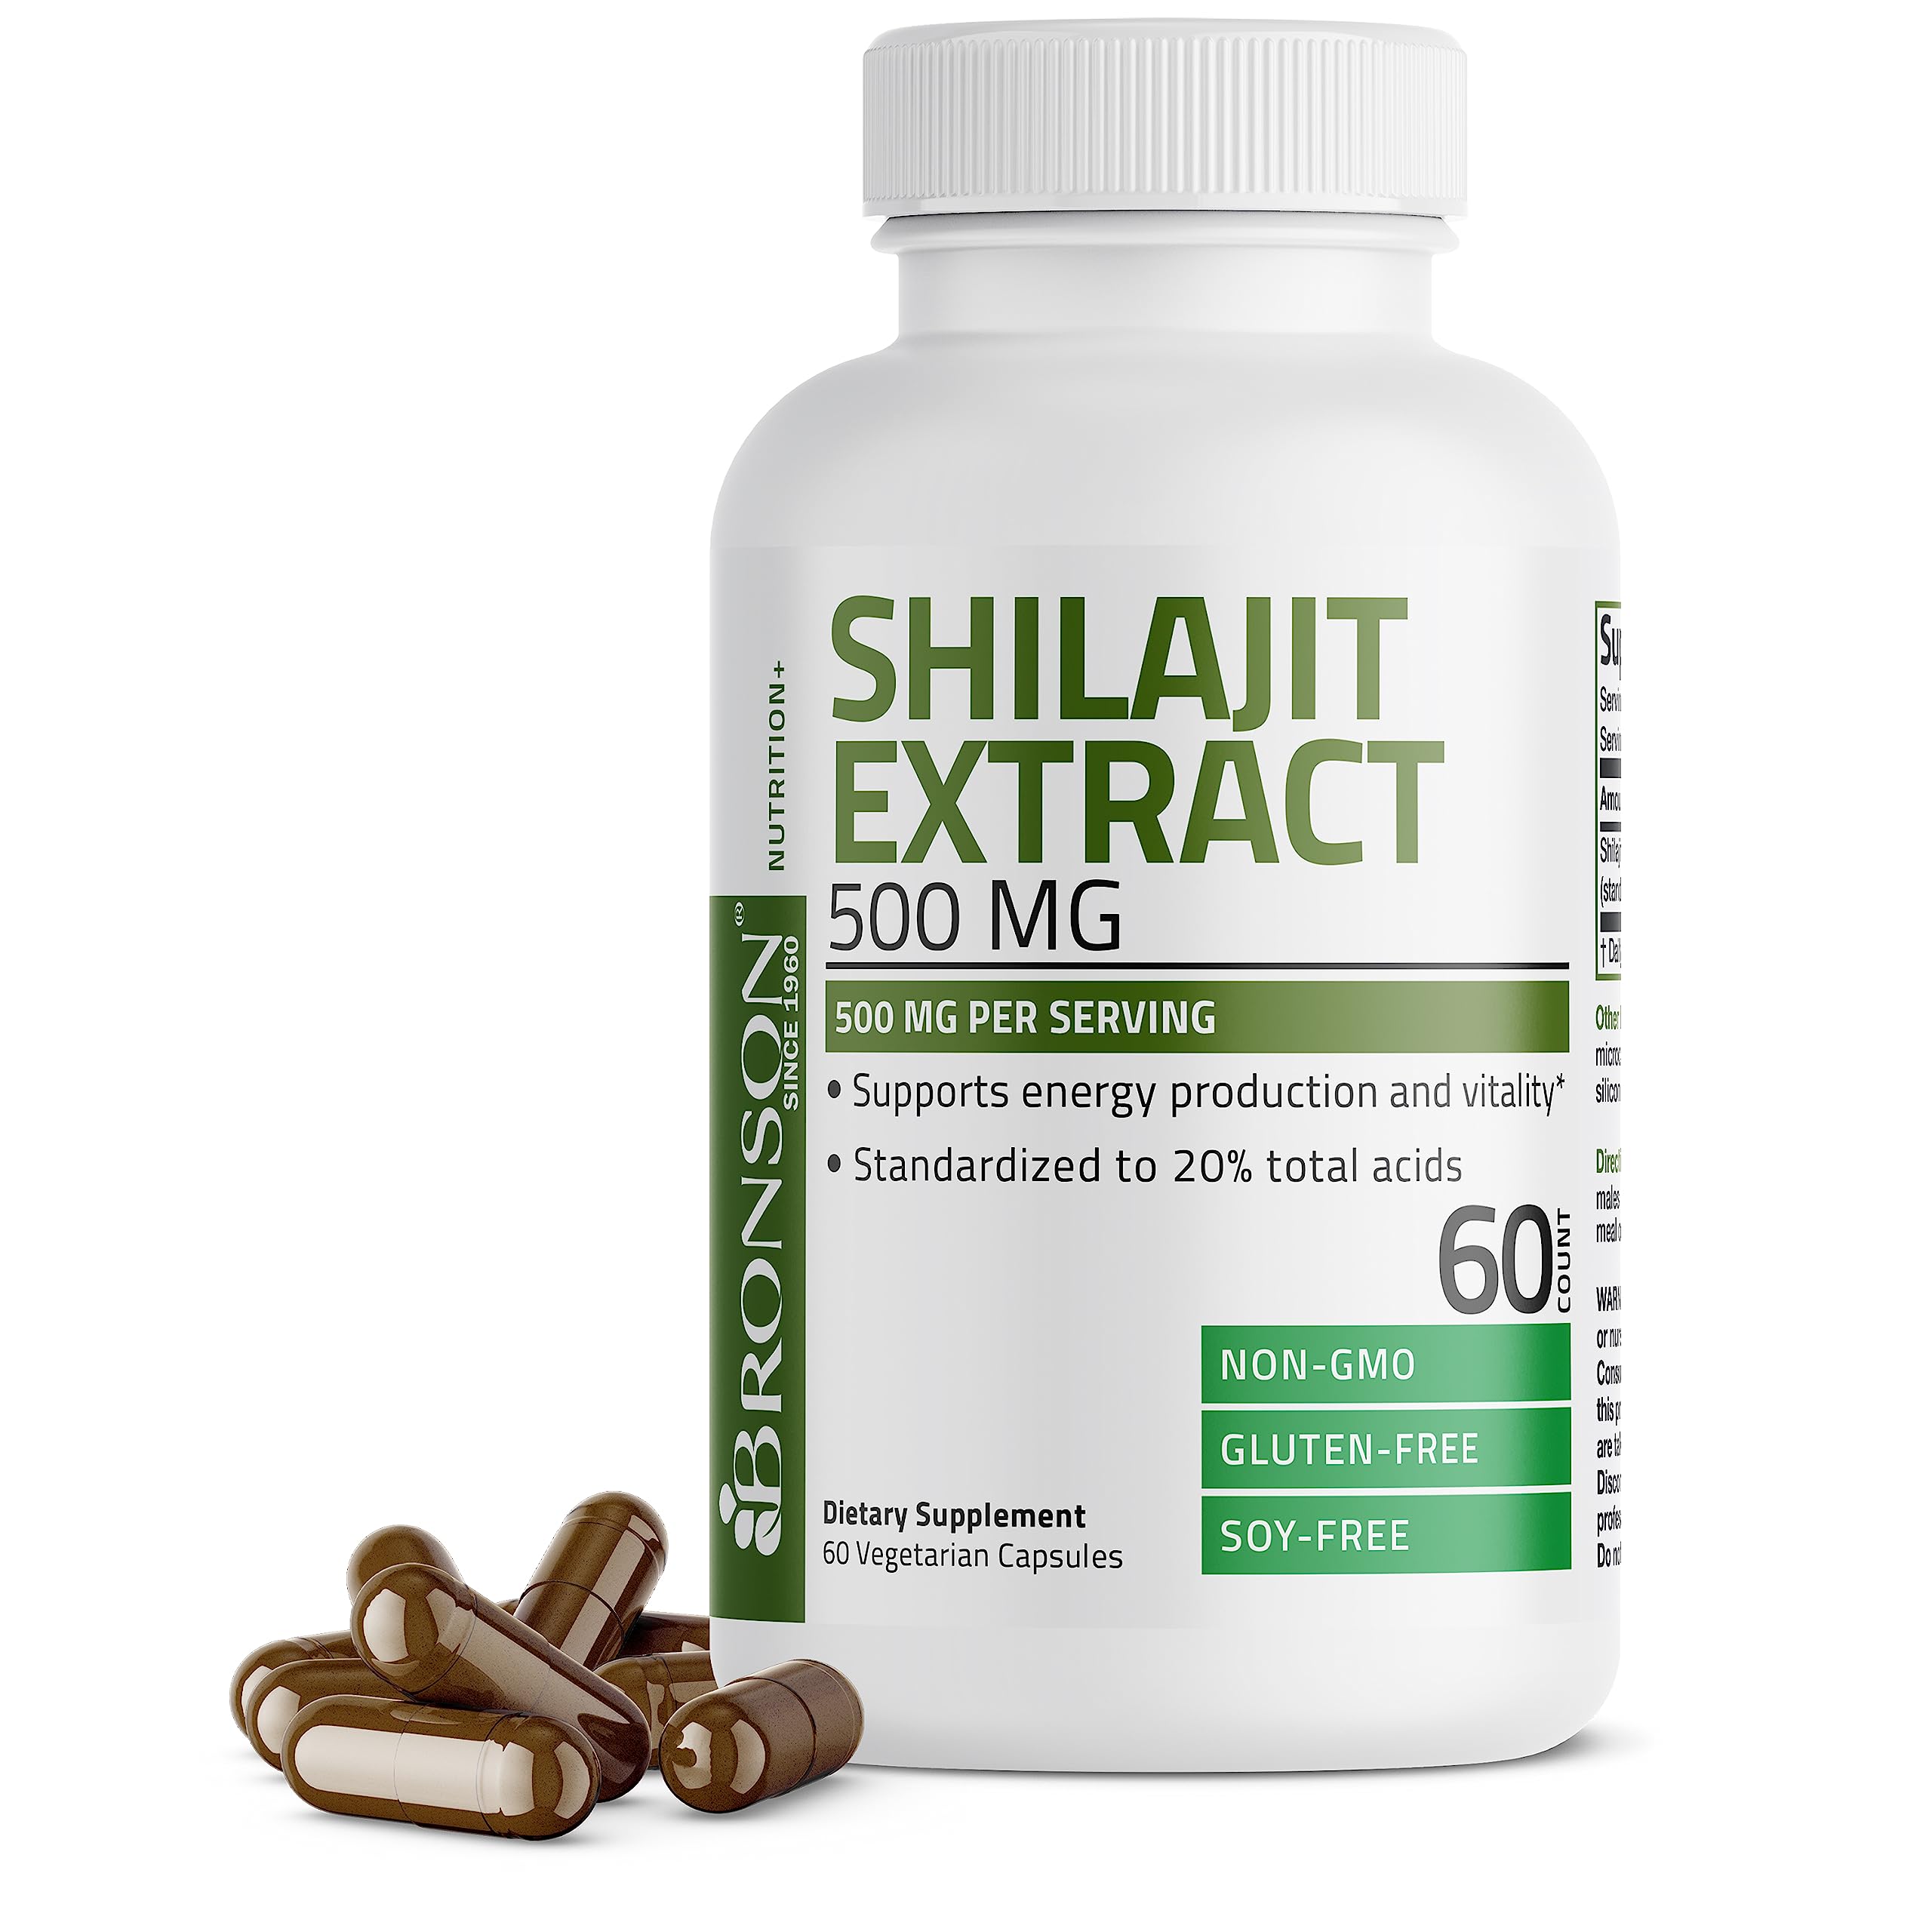 Shilajit Extract - 500 mg view 7 of 6